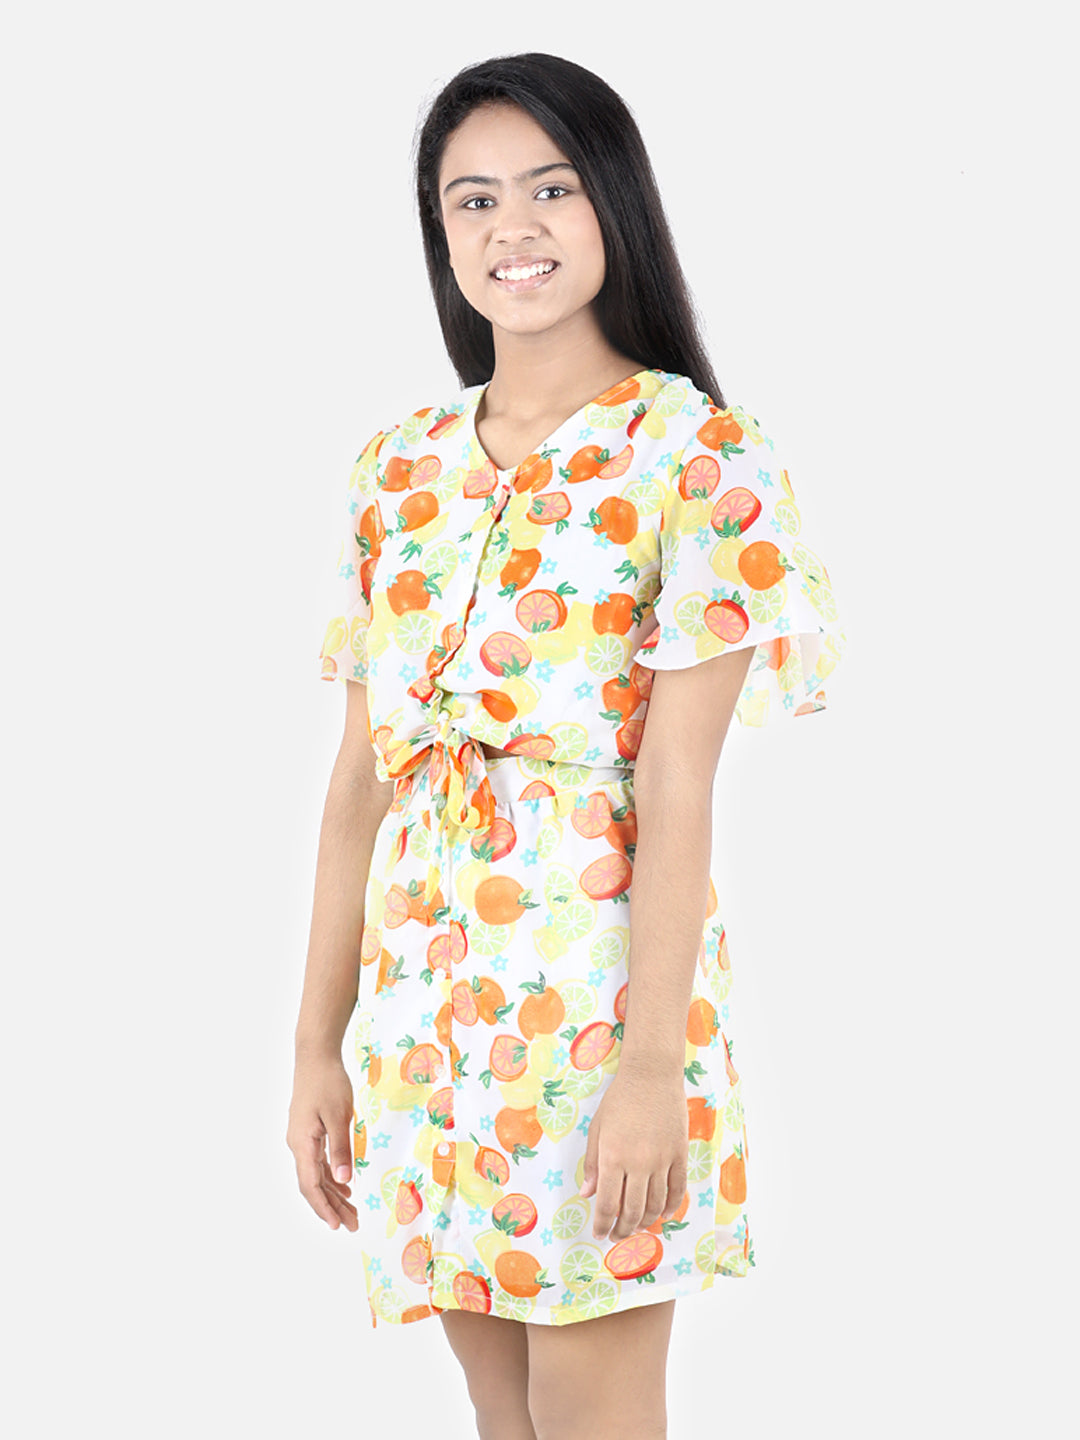 Girls Polyester Printed Dress with attached Tie knot style top